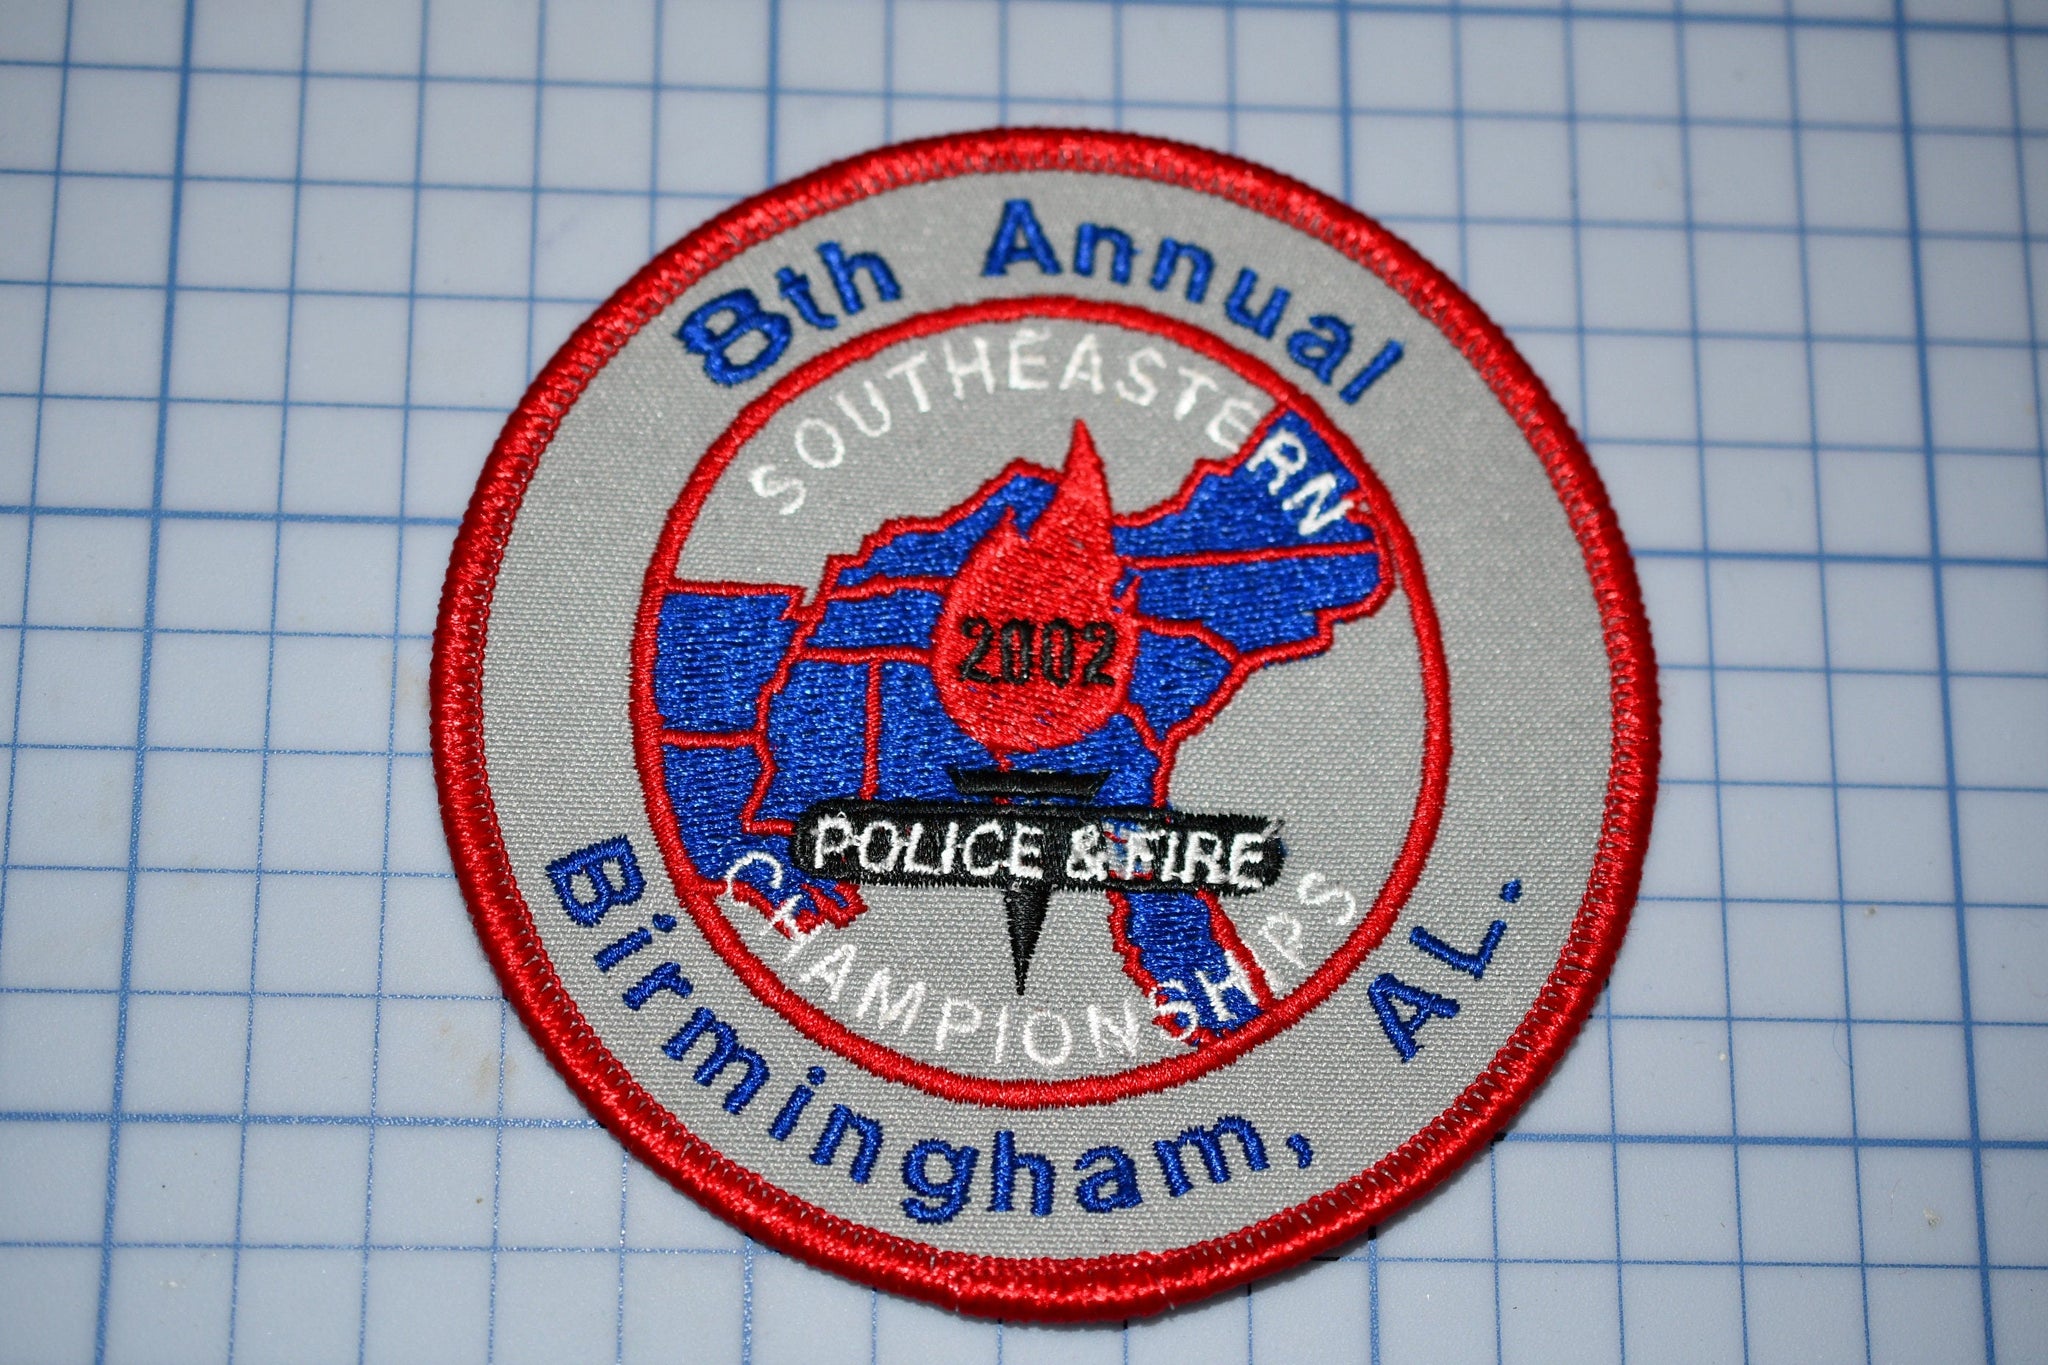 8th Annual Southeastern Police & Fire Championships Patch (S3-279)